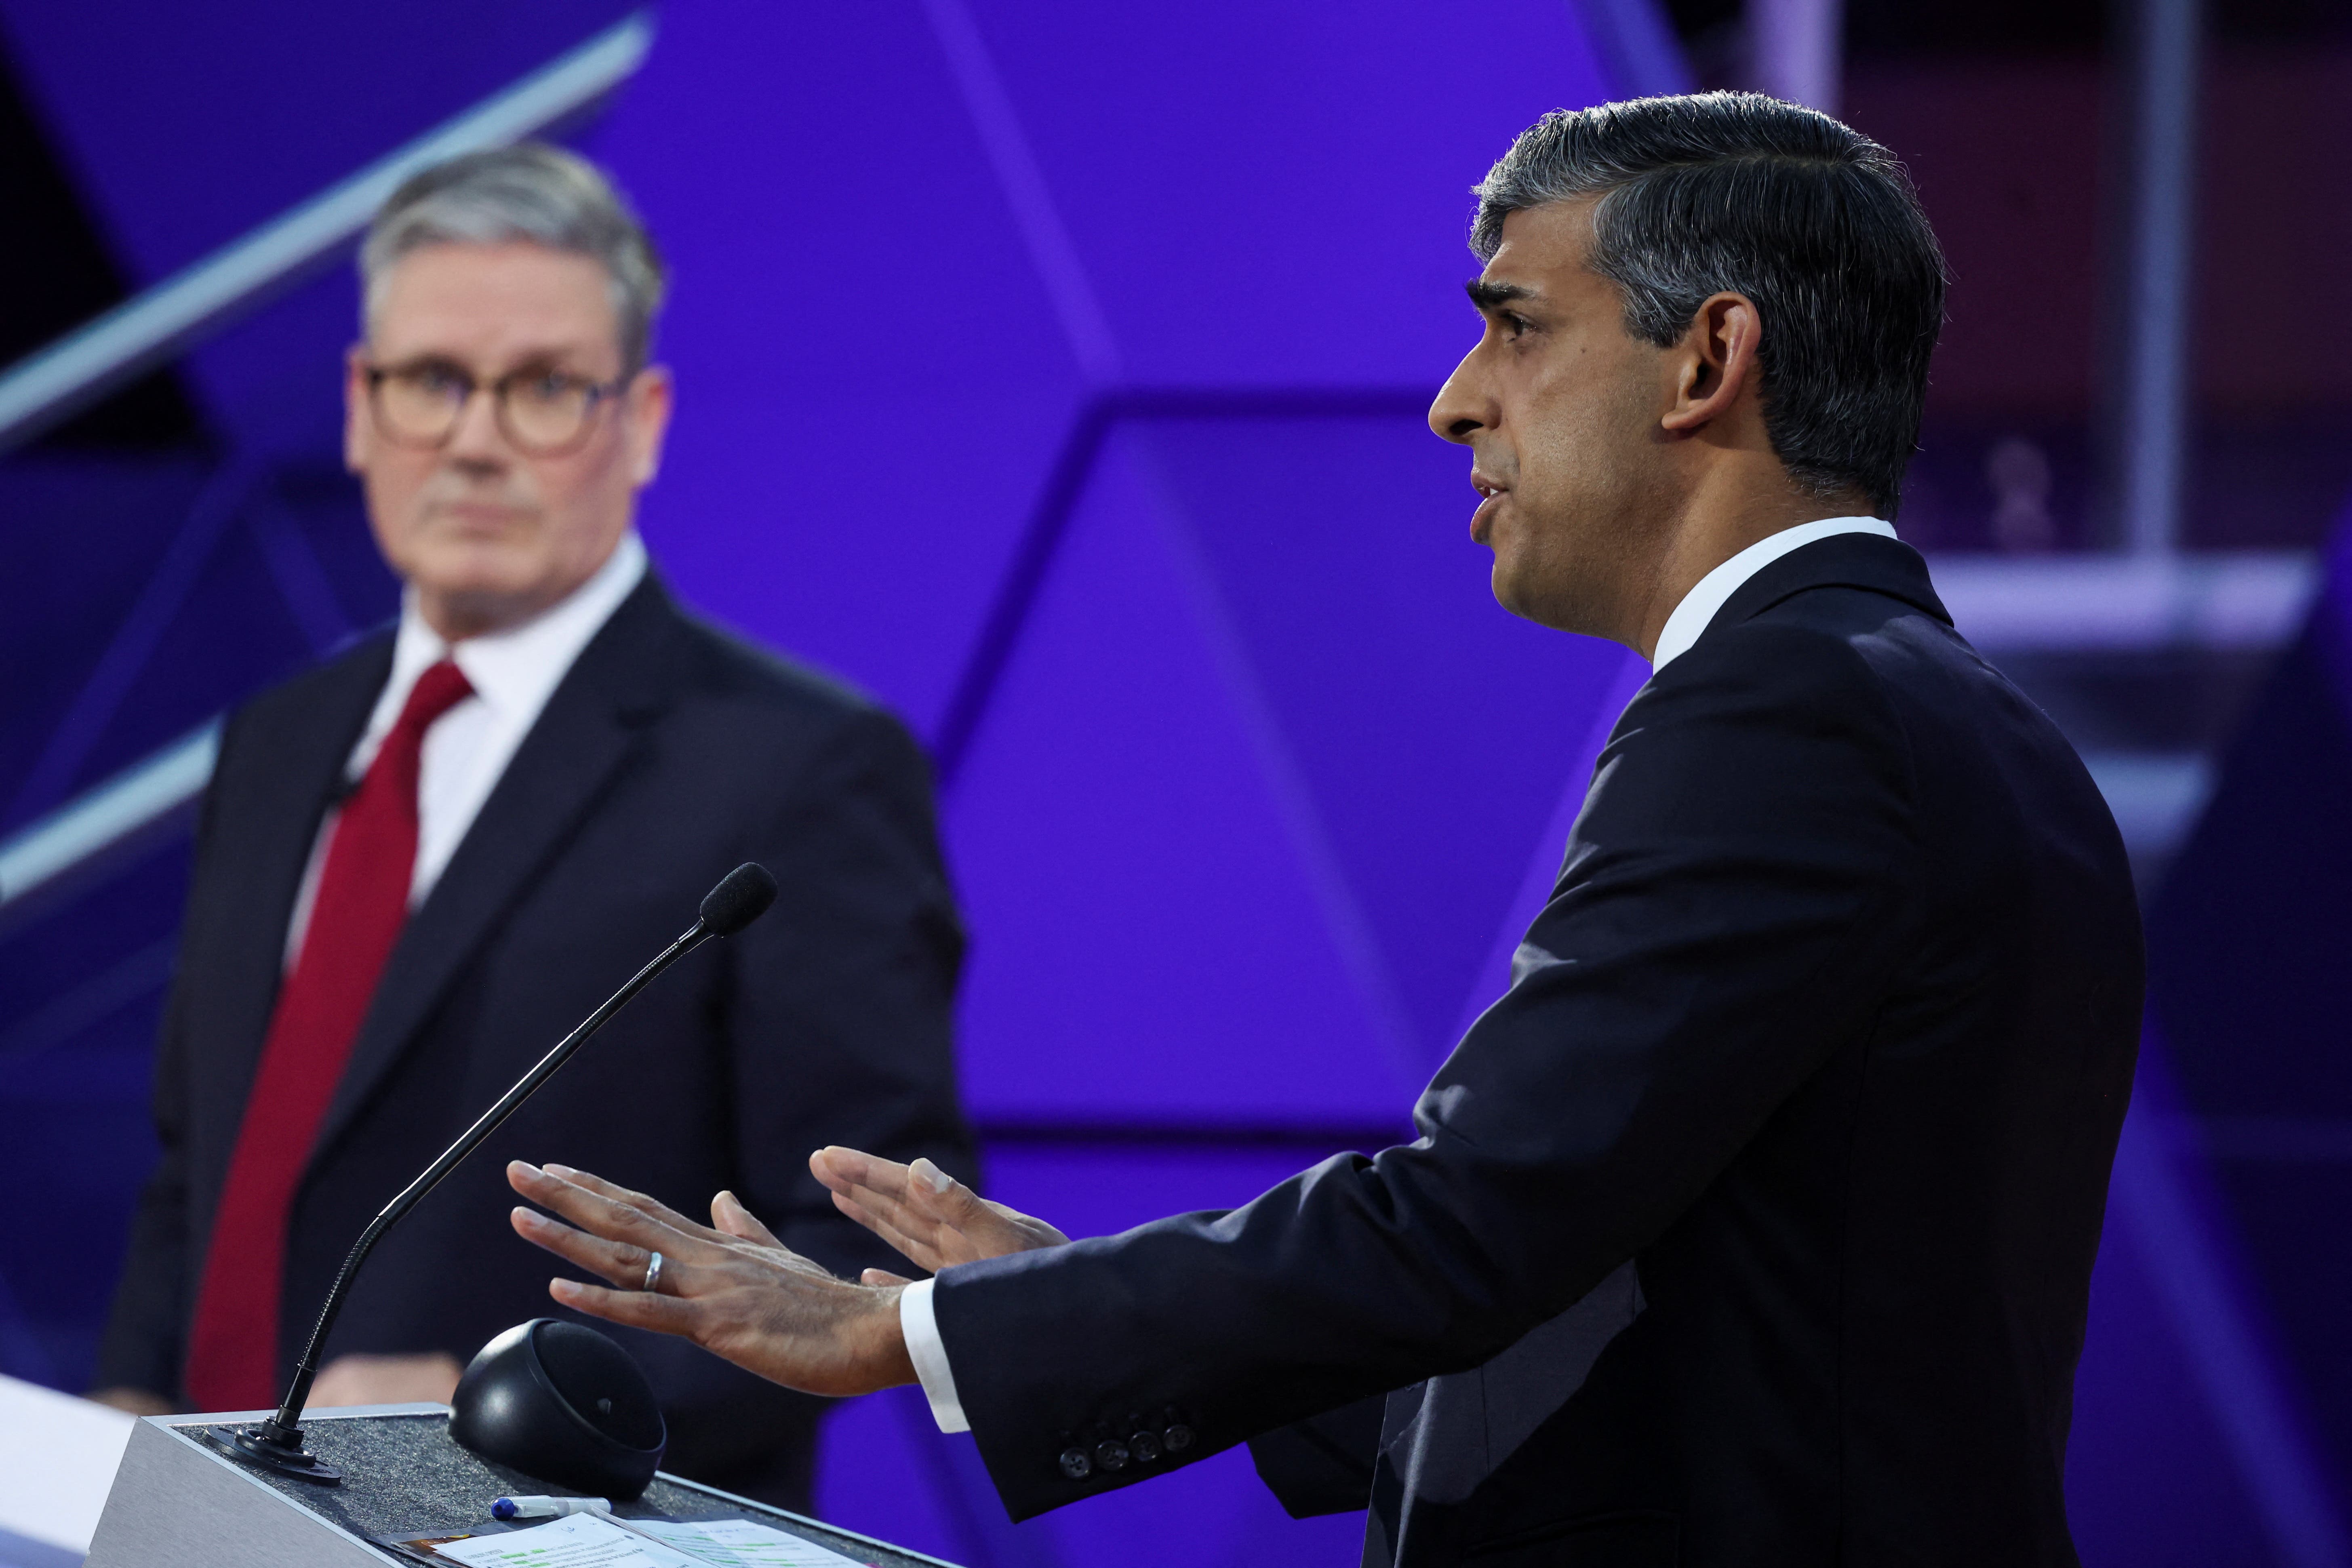 Labour leader Sir Keir Starmer and Prime Minister Rishi Sunak during their BBC head-to-head debate in Nottingham (Phil Noble/PA)